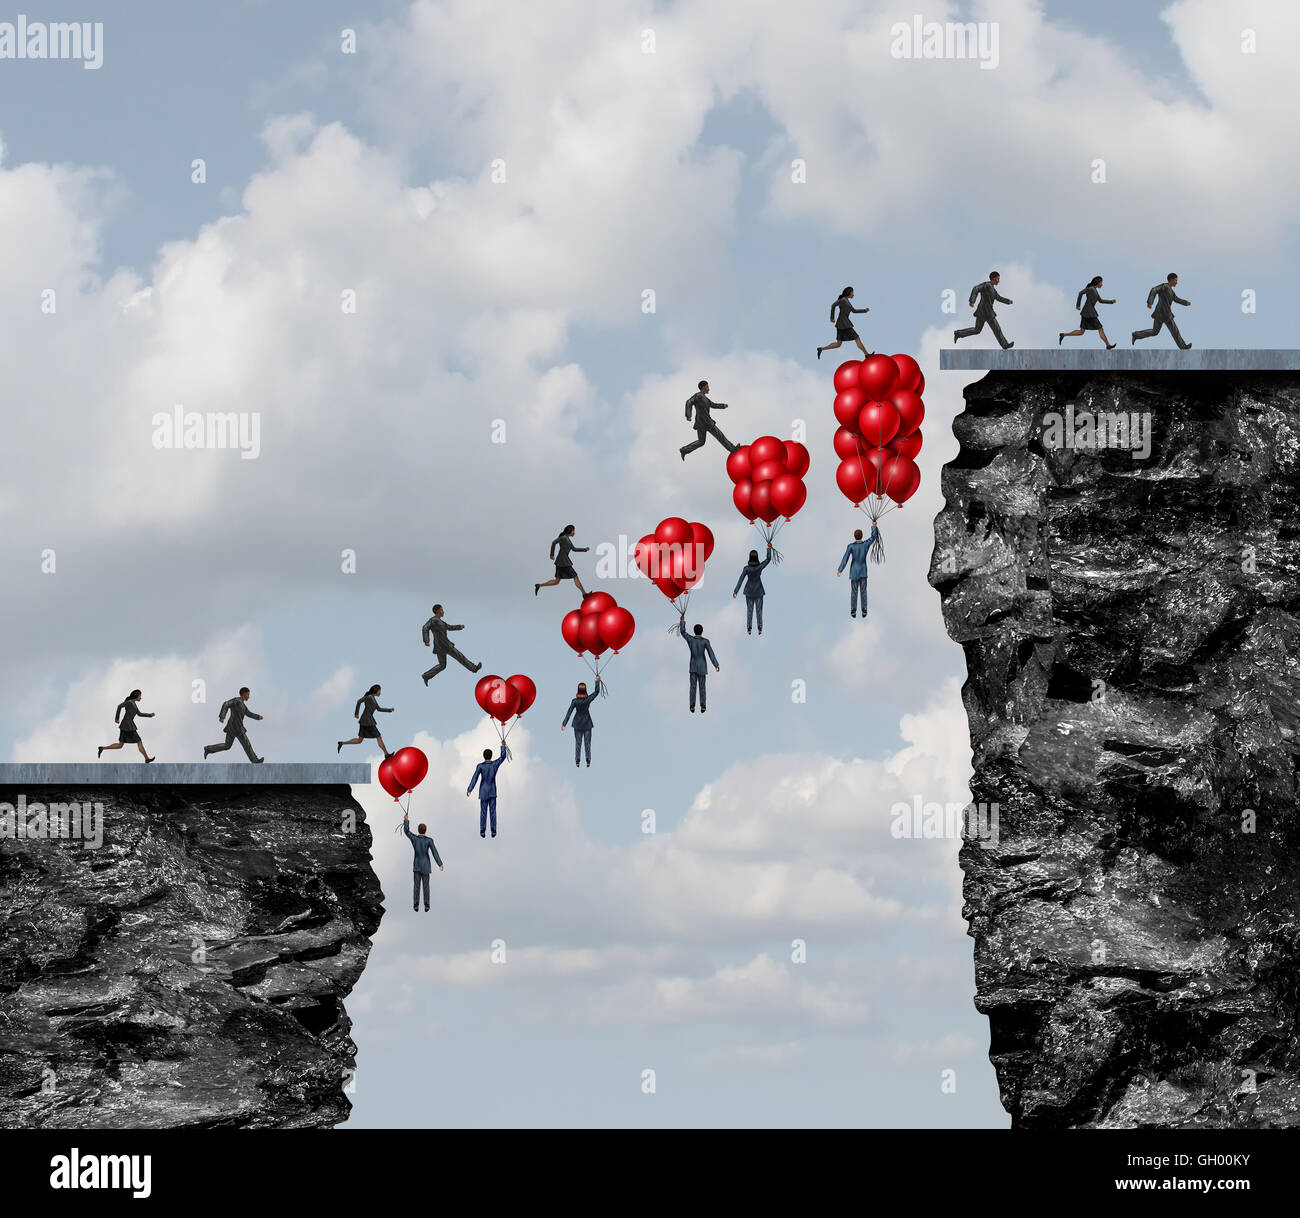 Business teamwork success and corporate team effort working together to solve challenges as a group of people holding balloons creating a successful bridge between a challenging gap with 3D illustration elements. Stock Photo